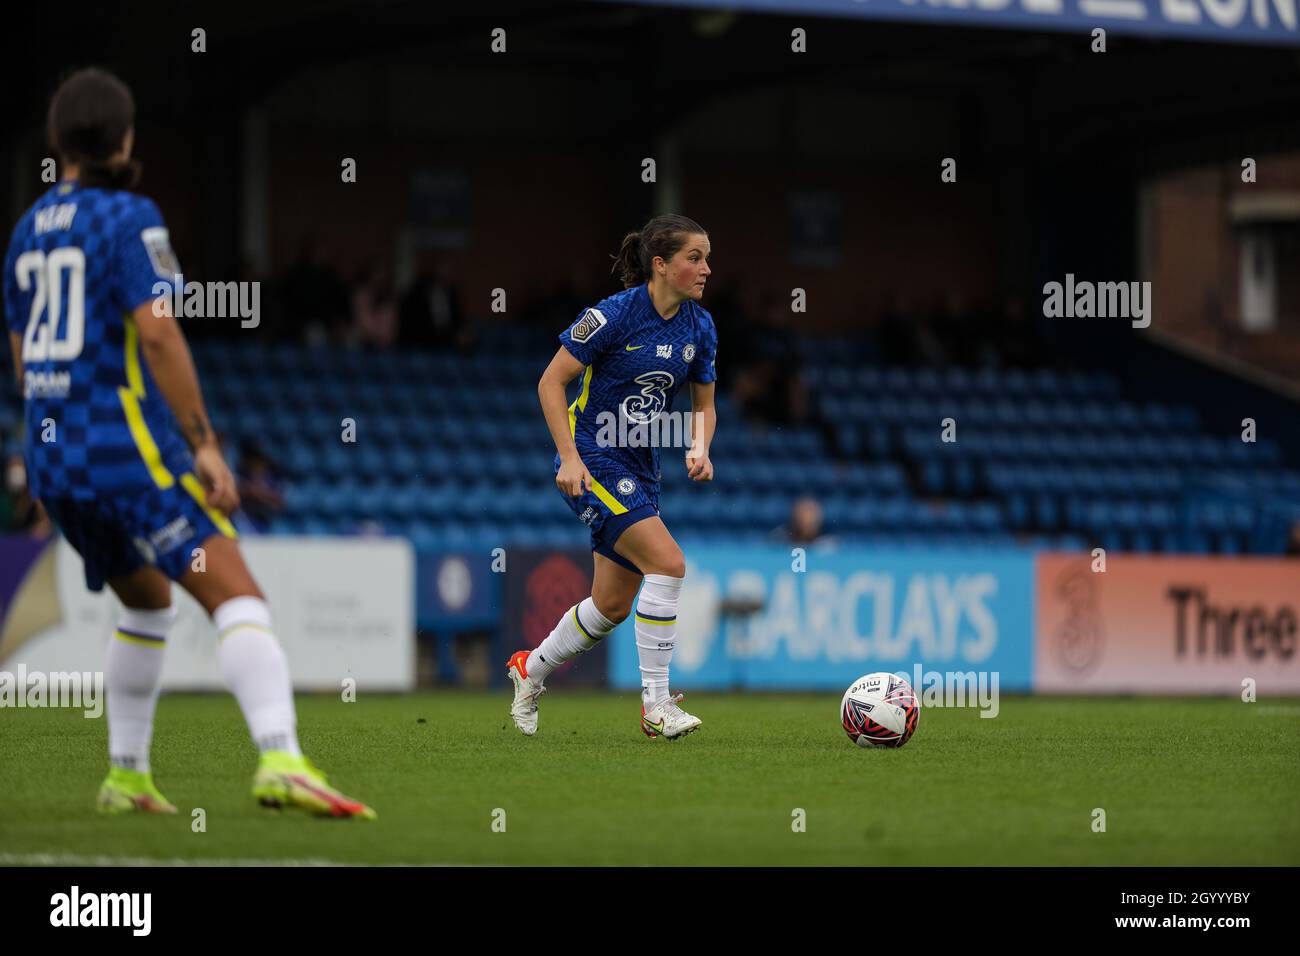 London, UK. 10th Oct, 2021. Barclays FA Womens Super League game between Chelsea and Leicester City at Kingsmeadow in London, England. Credit: SPP Sport Press Photo. /Alamy Live News Stock Photo